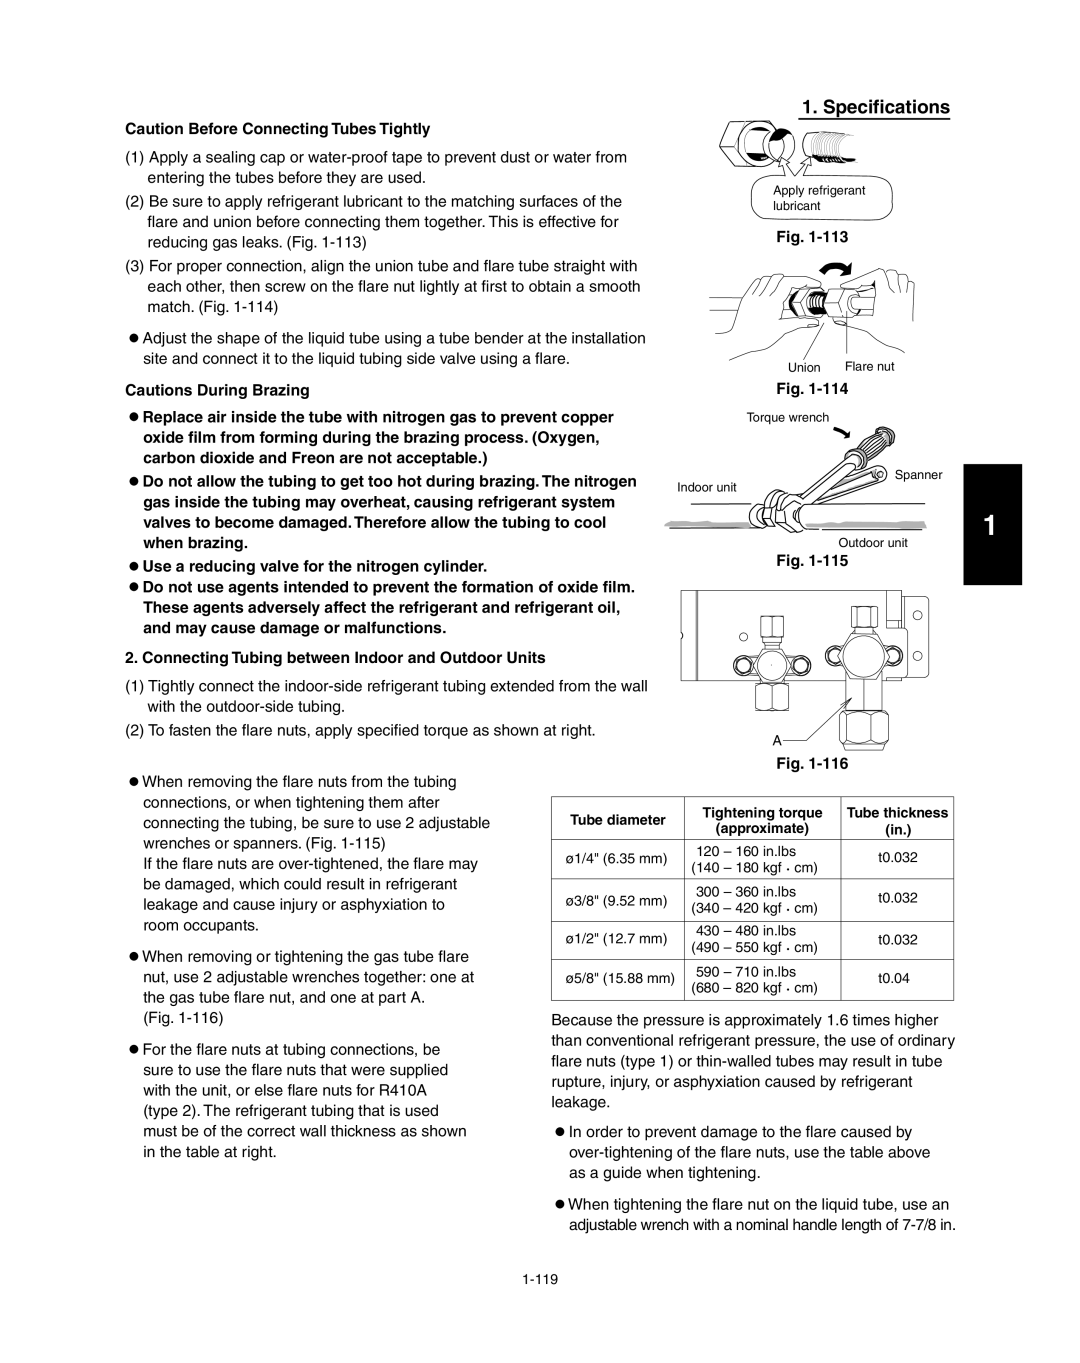 Panasonic R410A service manual Specifications, Caution Before Connecting Tubes Tightly, Cautions During Brazing, Fig 